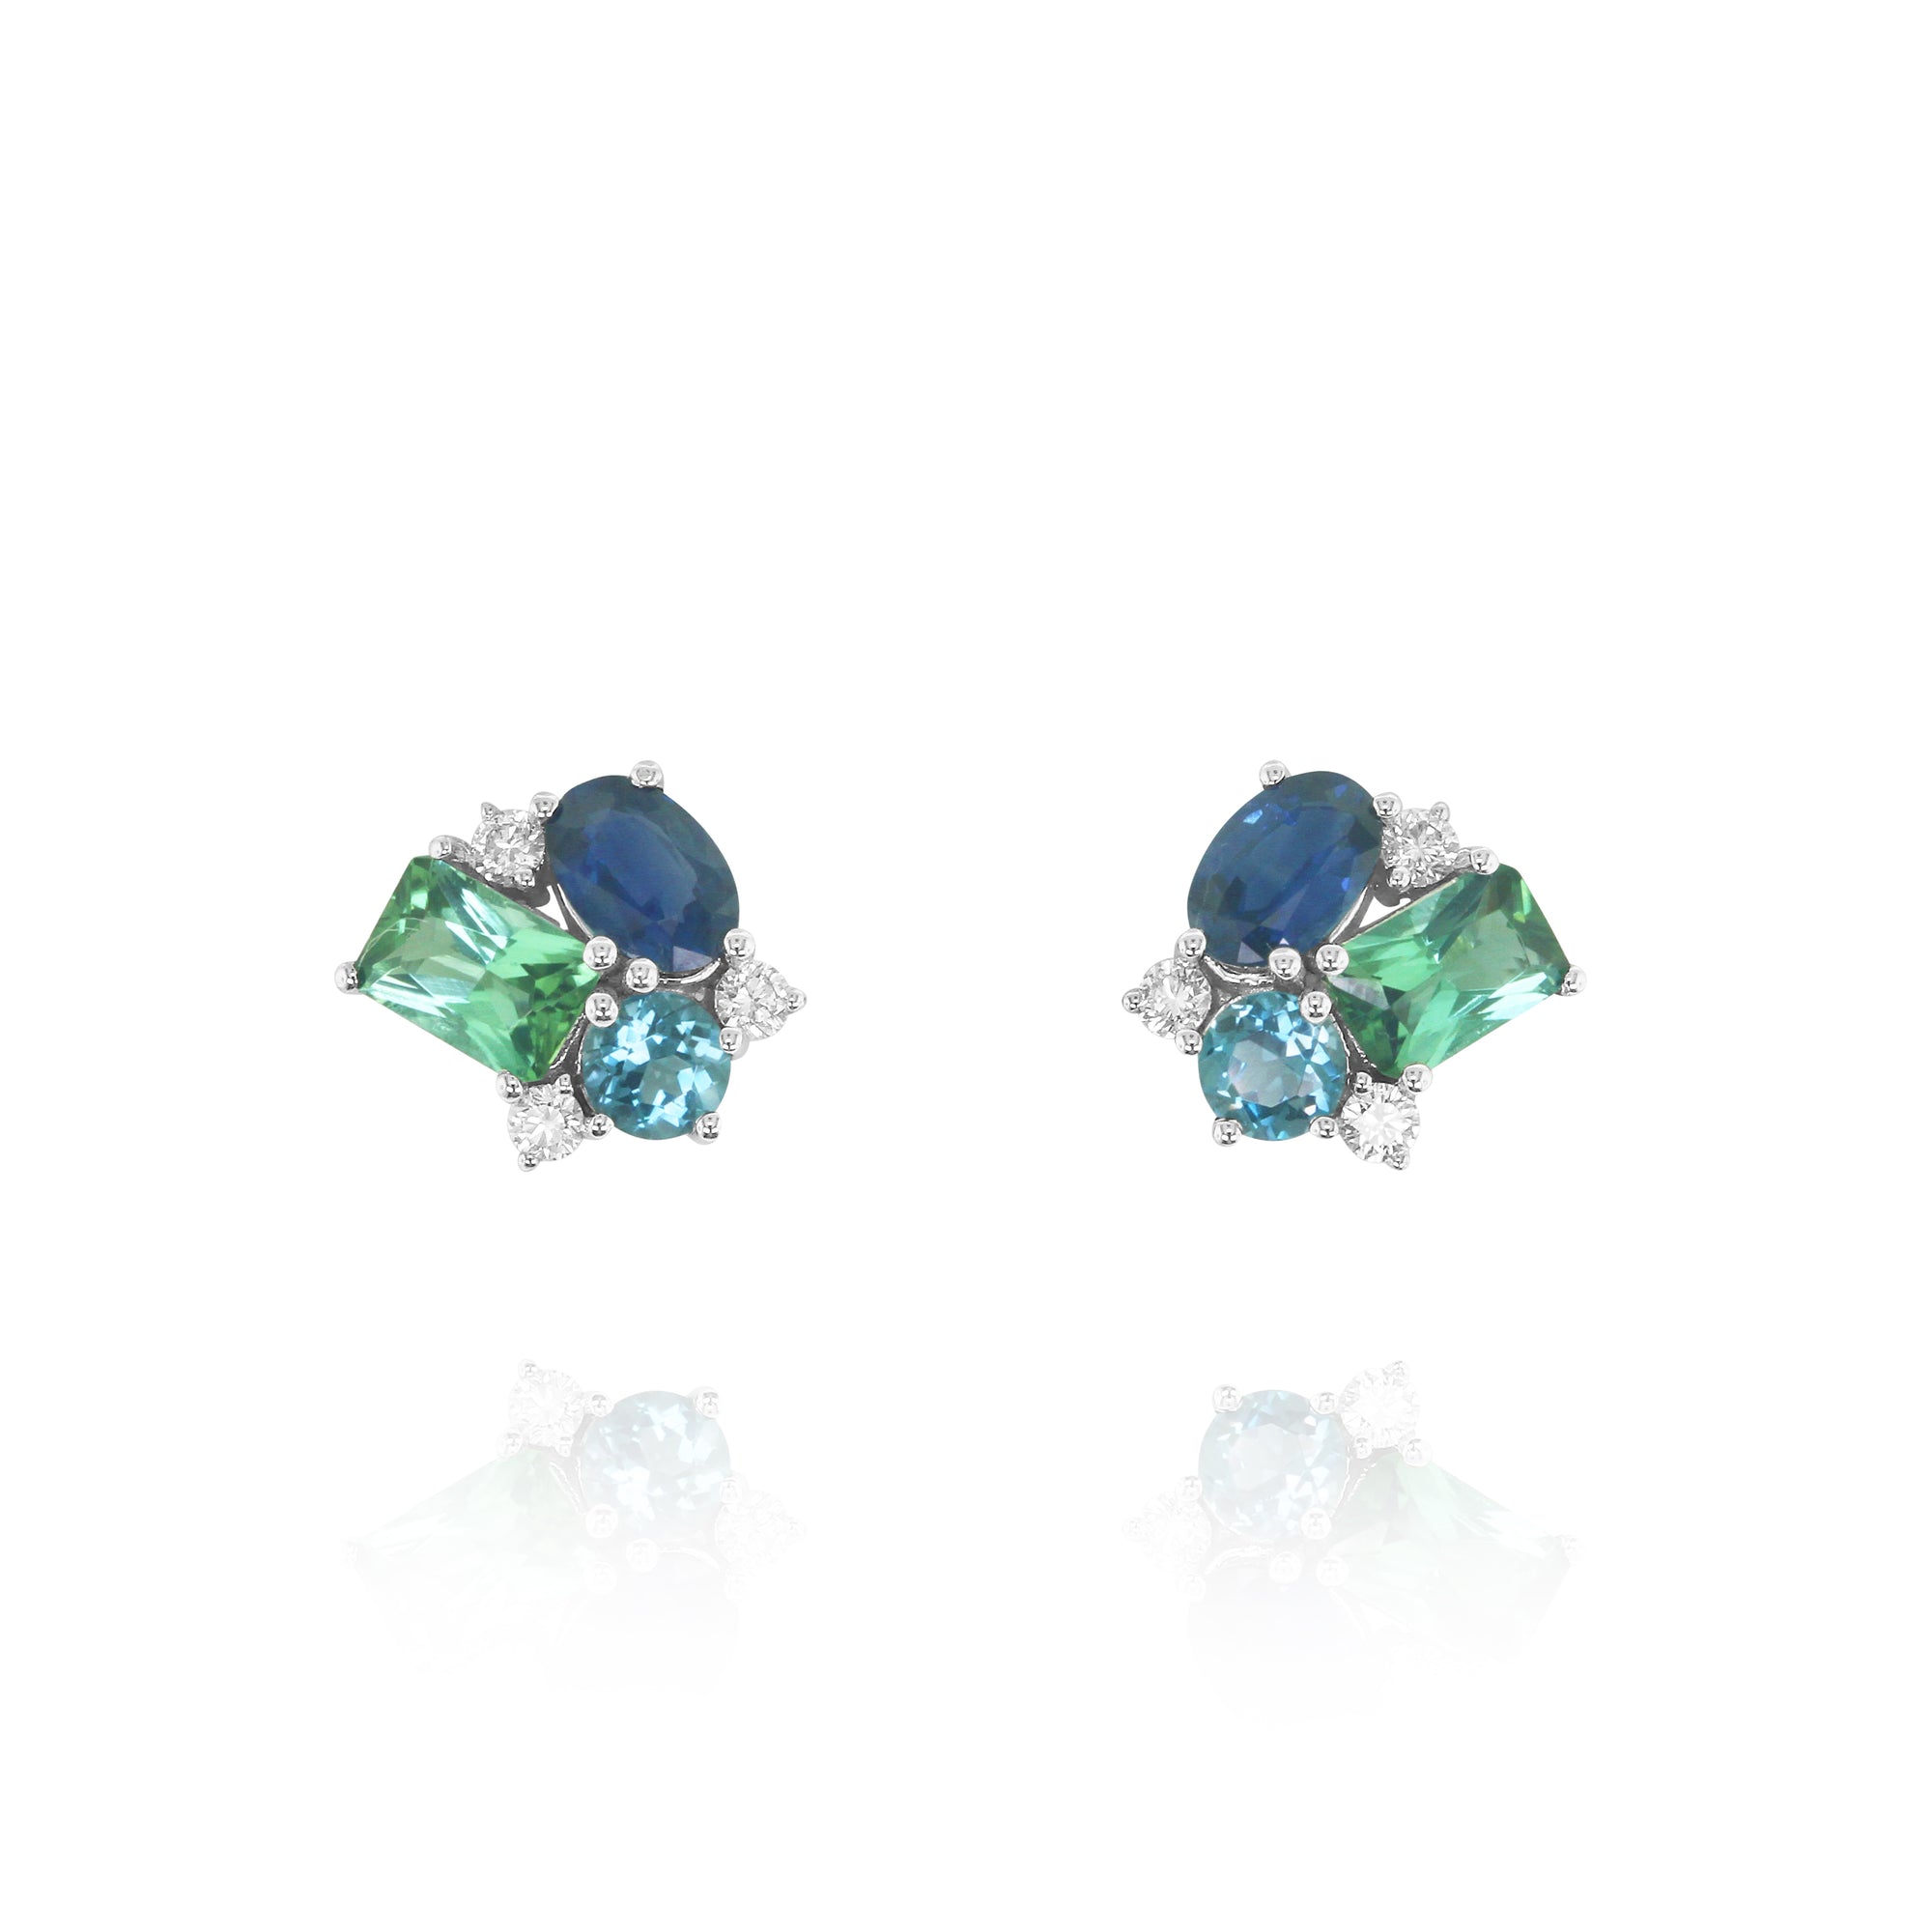 Sapphire, Tourmaline, Topaz & Diamond Earrings by Yael available at Talisman Collection Fine Jewelers in El Dorado Hills, CA and online. Perfect little pops of color, these soft, cool toned earrings are perfect for every day. They feature 1.10 cts of blue sapphires, 0.98 cts of rad green tourmalines, 0.55 cts of blue topaz and 0.18 cts of white diamonds set in 14k white gold. And for a lovely matched set, consider the coordinating understated necklace.